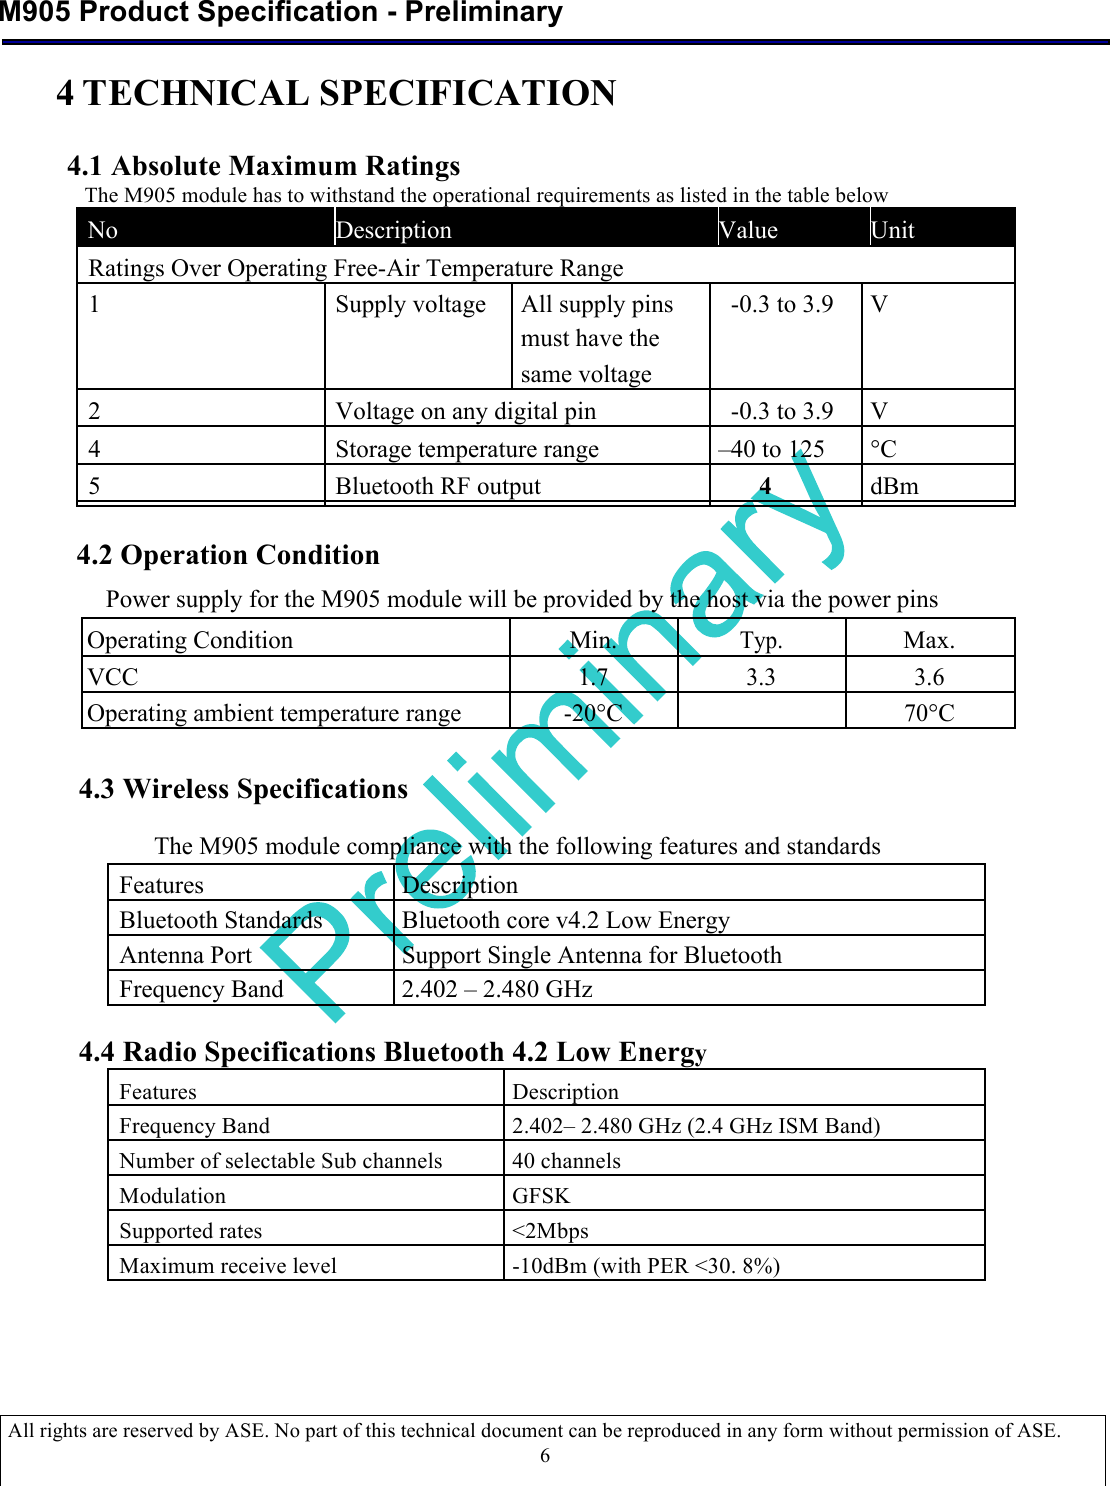  M905 Product Specification - Preliminary  All rights are reserved by ASE. No part of this technical document can be reproduced in any form without permission of ASE.  6 4 TECHNICAL SPECIFICATION   4.1 Absolute Maximum Ratings   The M905 module has to withstand the operational requirements as listed in the table below  No   Description   Value   Unit            Ratings Over Operating Free-Air Temperature Range         1  Supply voltage All supply pins   -0.3 to 3.9   V        must have the              same voltage         2  Voltage on any digital pin     -0.3 to 3.9   V   4  Storage temperature range   –40 to 125   °C   5  Bluetooth RF output  4    dBm                  4.2 Operation Condition  Power supply for the M905 module will be provided by the host via the power pins  Operating Condition Min. Typ. Max. VCC 1.7 3.3 3.6 Operating ambient temperature range -20°C  70°C   4.3 Wireless Specifications  The M905 module compliance with the following features and standards  Features Description Bluetooth Standards Bluetooth core v4.2 Low Energy Antenna Port Support Single Antenna for Bluetooth Frequency Band 2.402 – 2.480 GHz  4.4 Radio Specifications Bluetooth 4.2 Low Energy Features Description Frequency Band 2.402– 2.480 GHz (2.4 GHz ISM Band) Number of selectable Sub channels 40 channels Modulation GFSK Supported rates &lt;2Mbps Maximum receive level -10dBm (with PER &lt;30. 8%)    